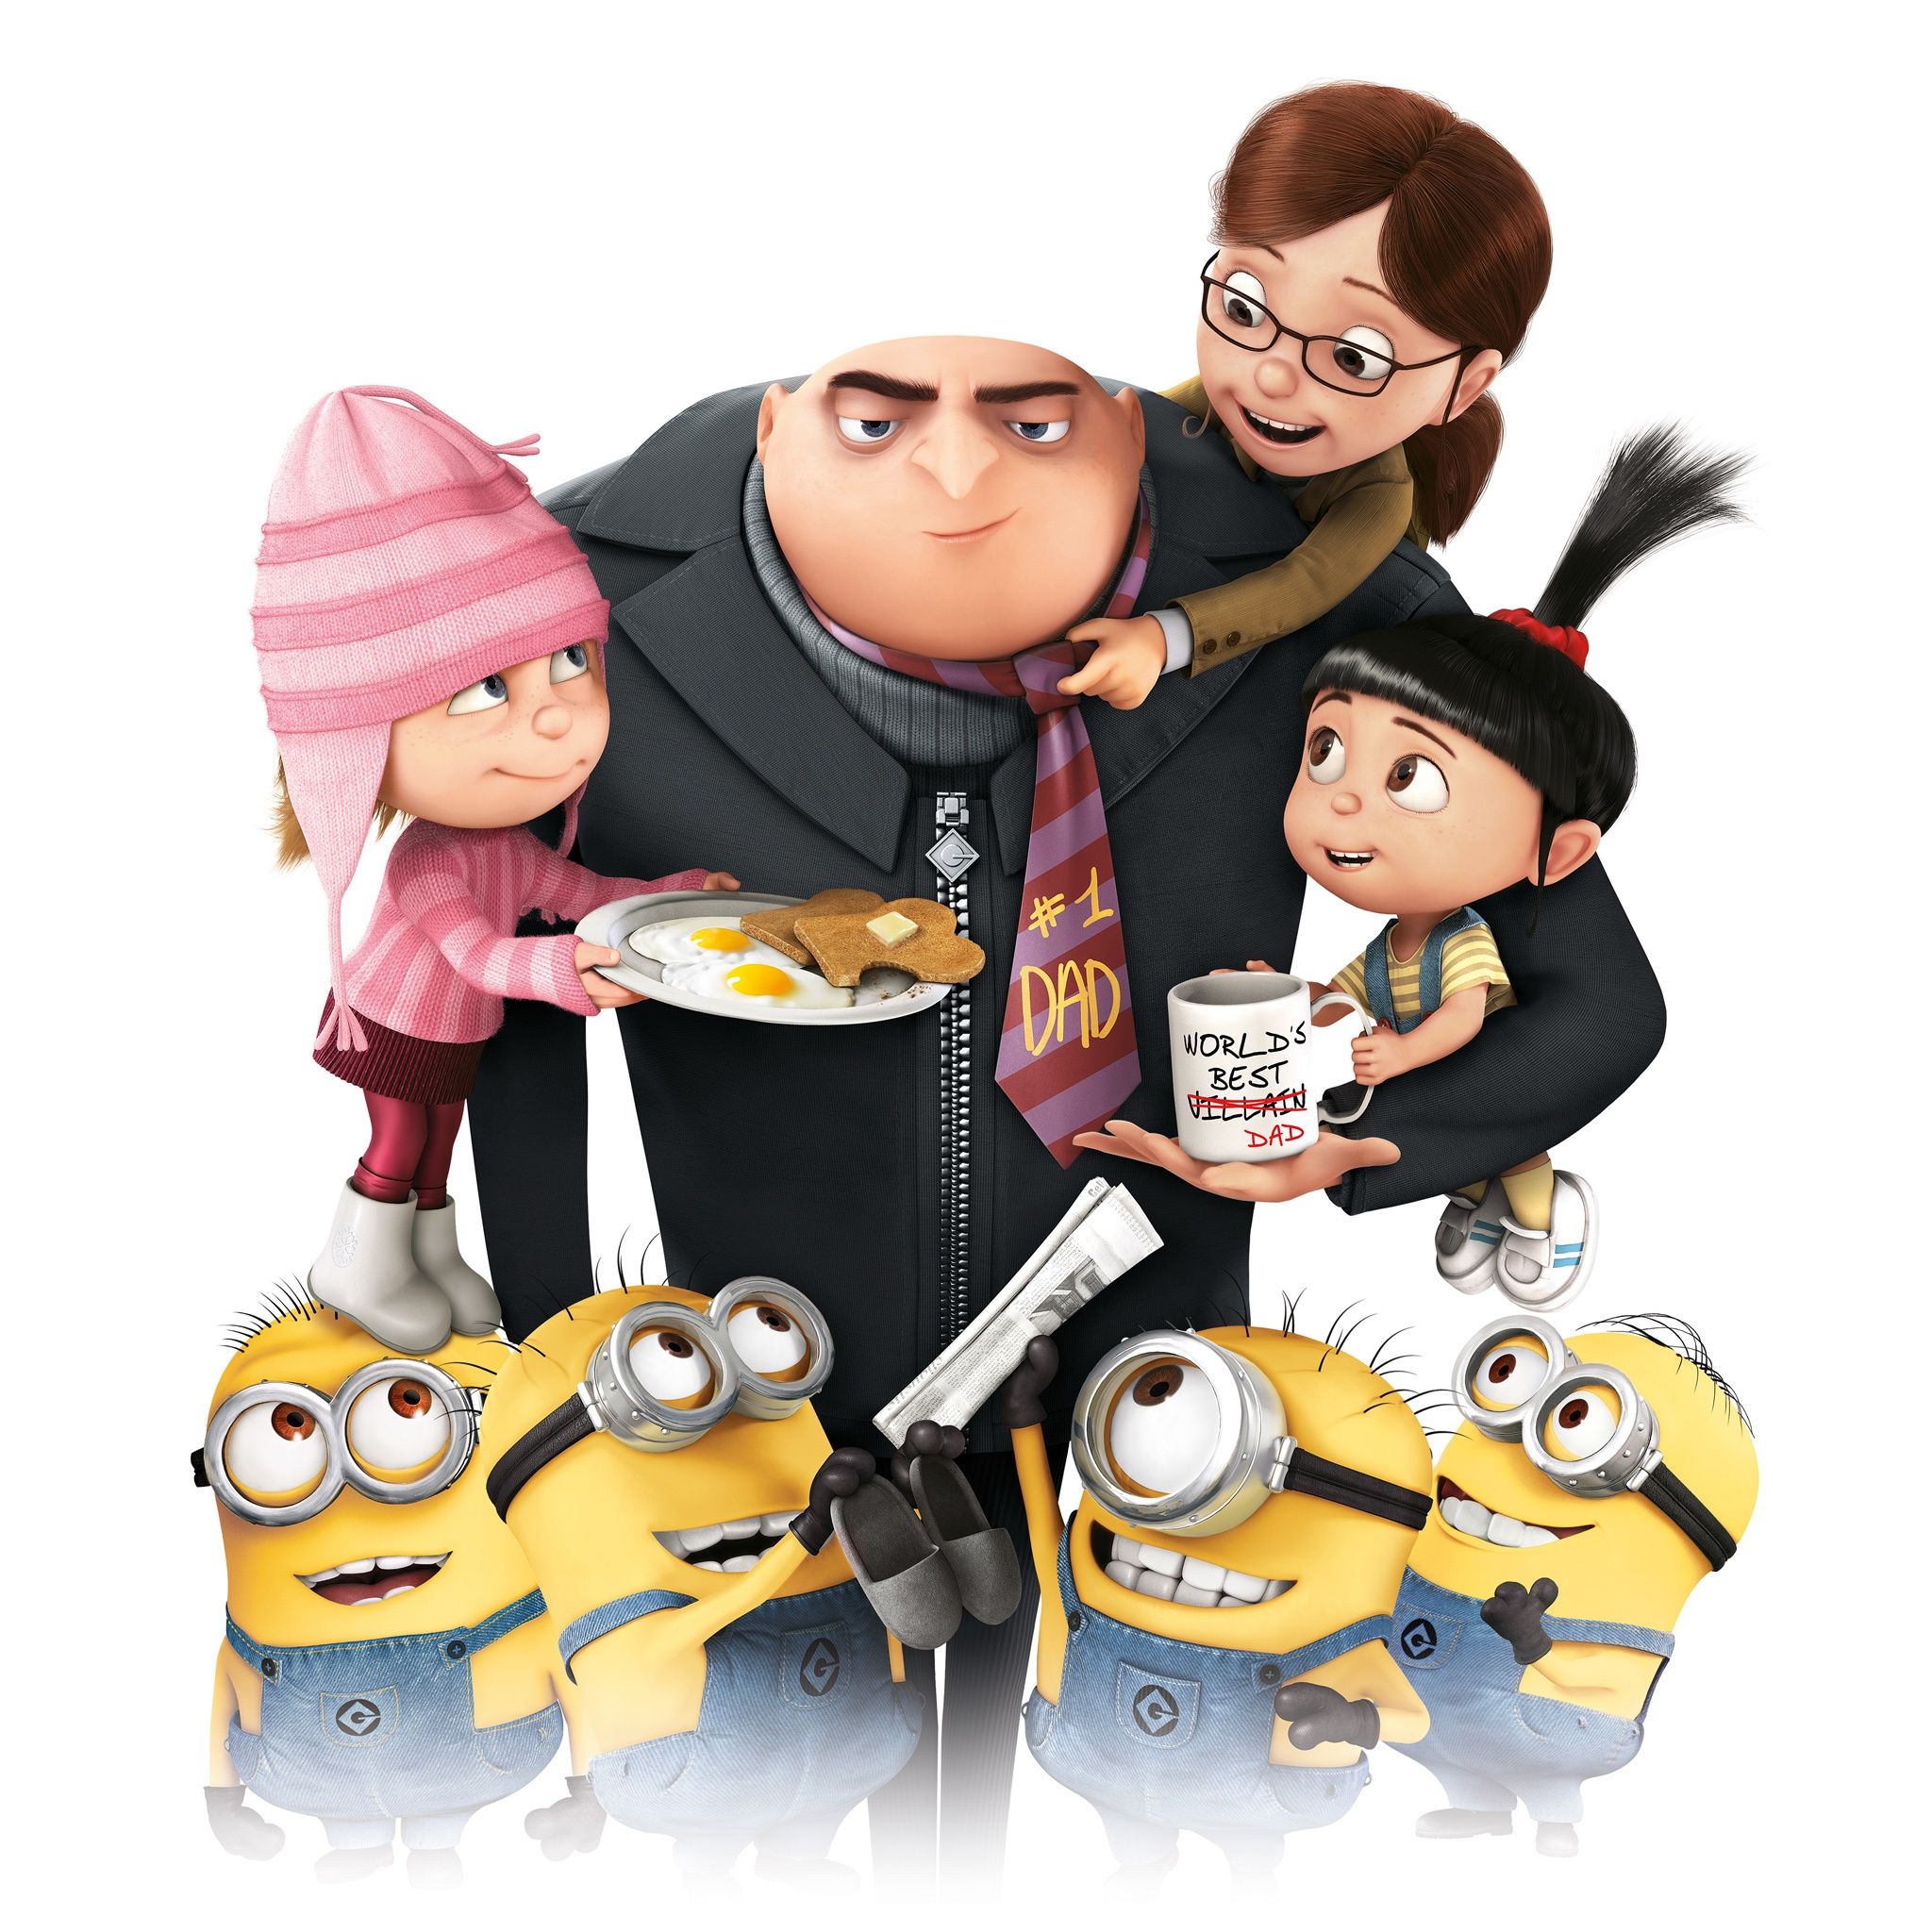 2013 Despicable Me 2 HD Wallpaper - iHD Backgrounds